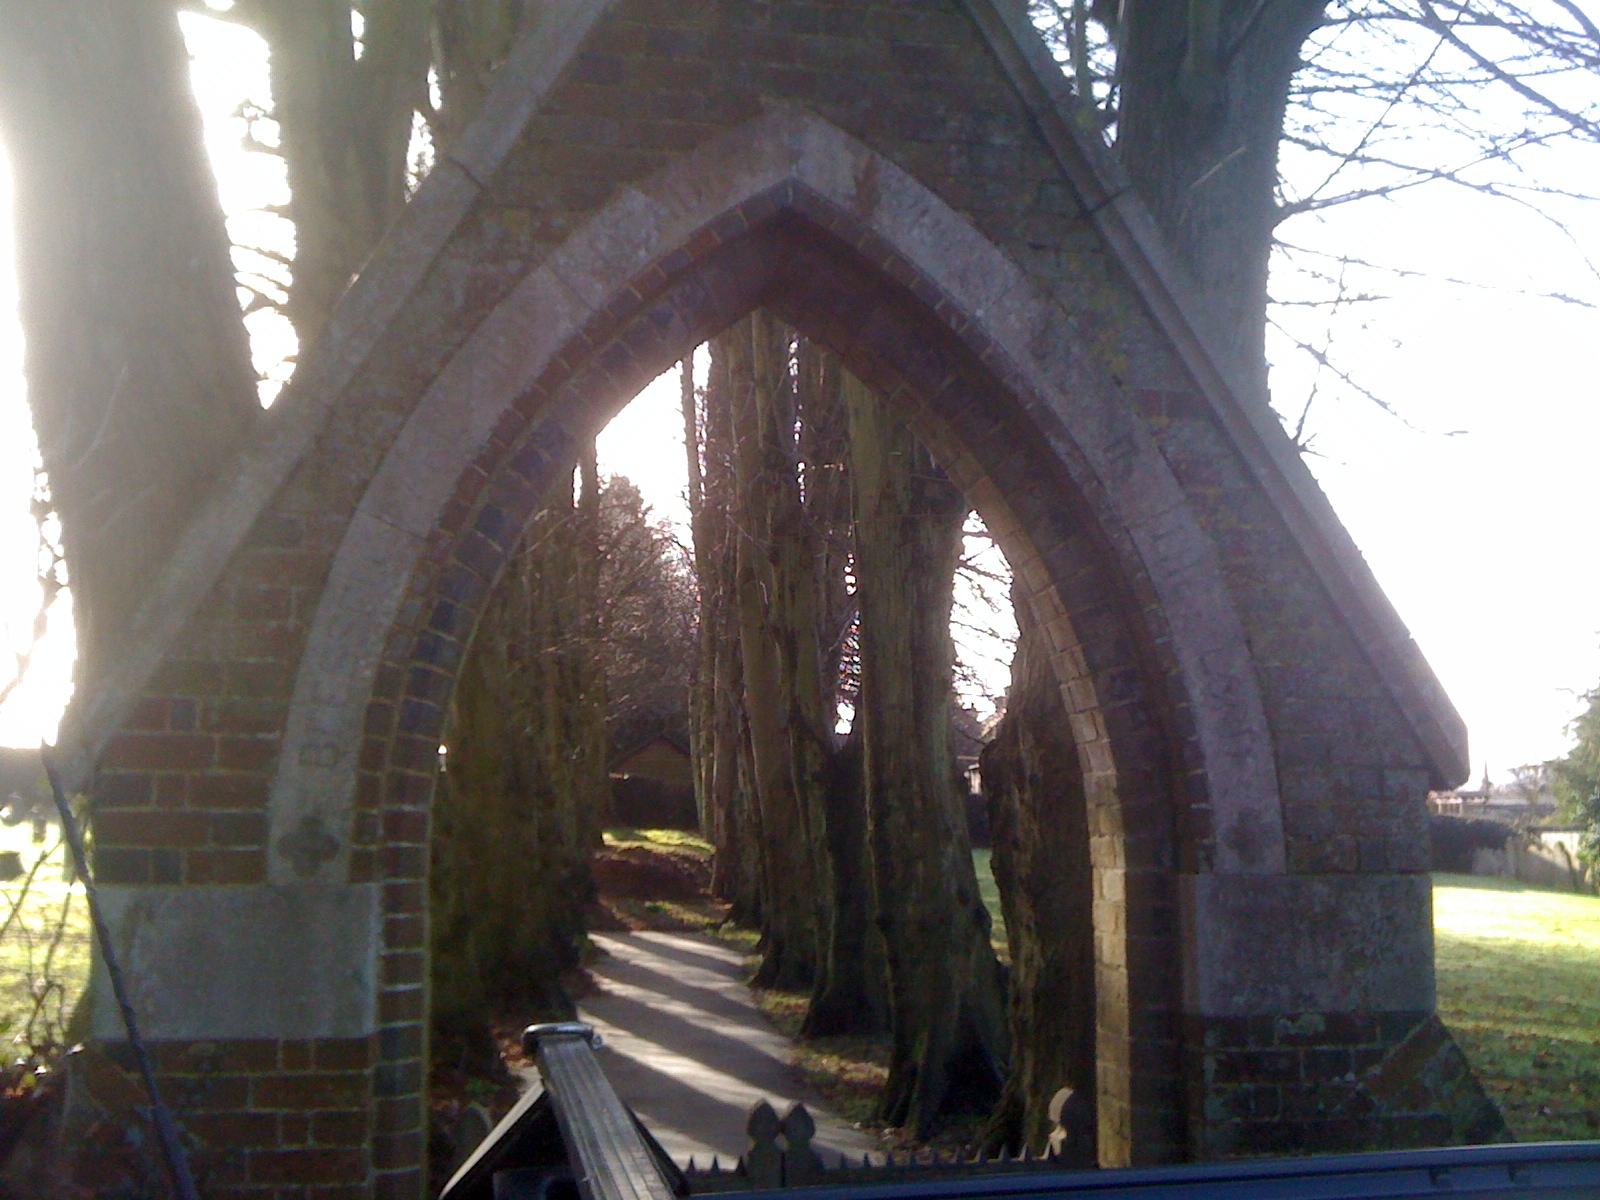 Lych gate arch before restoration